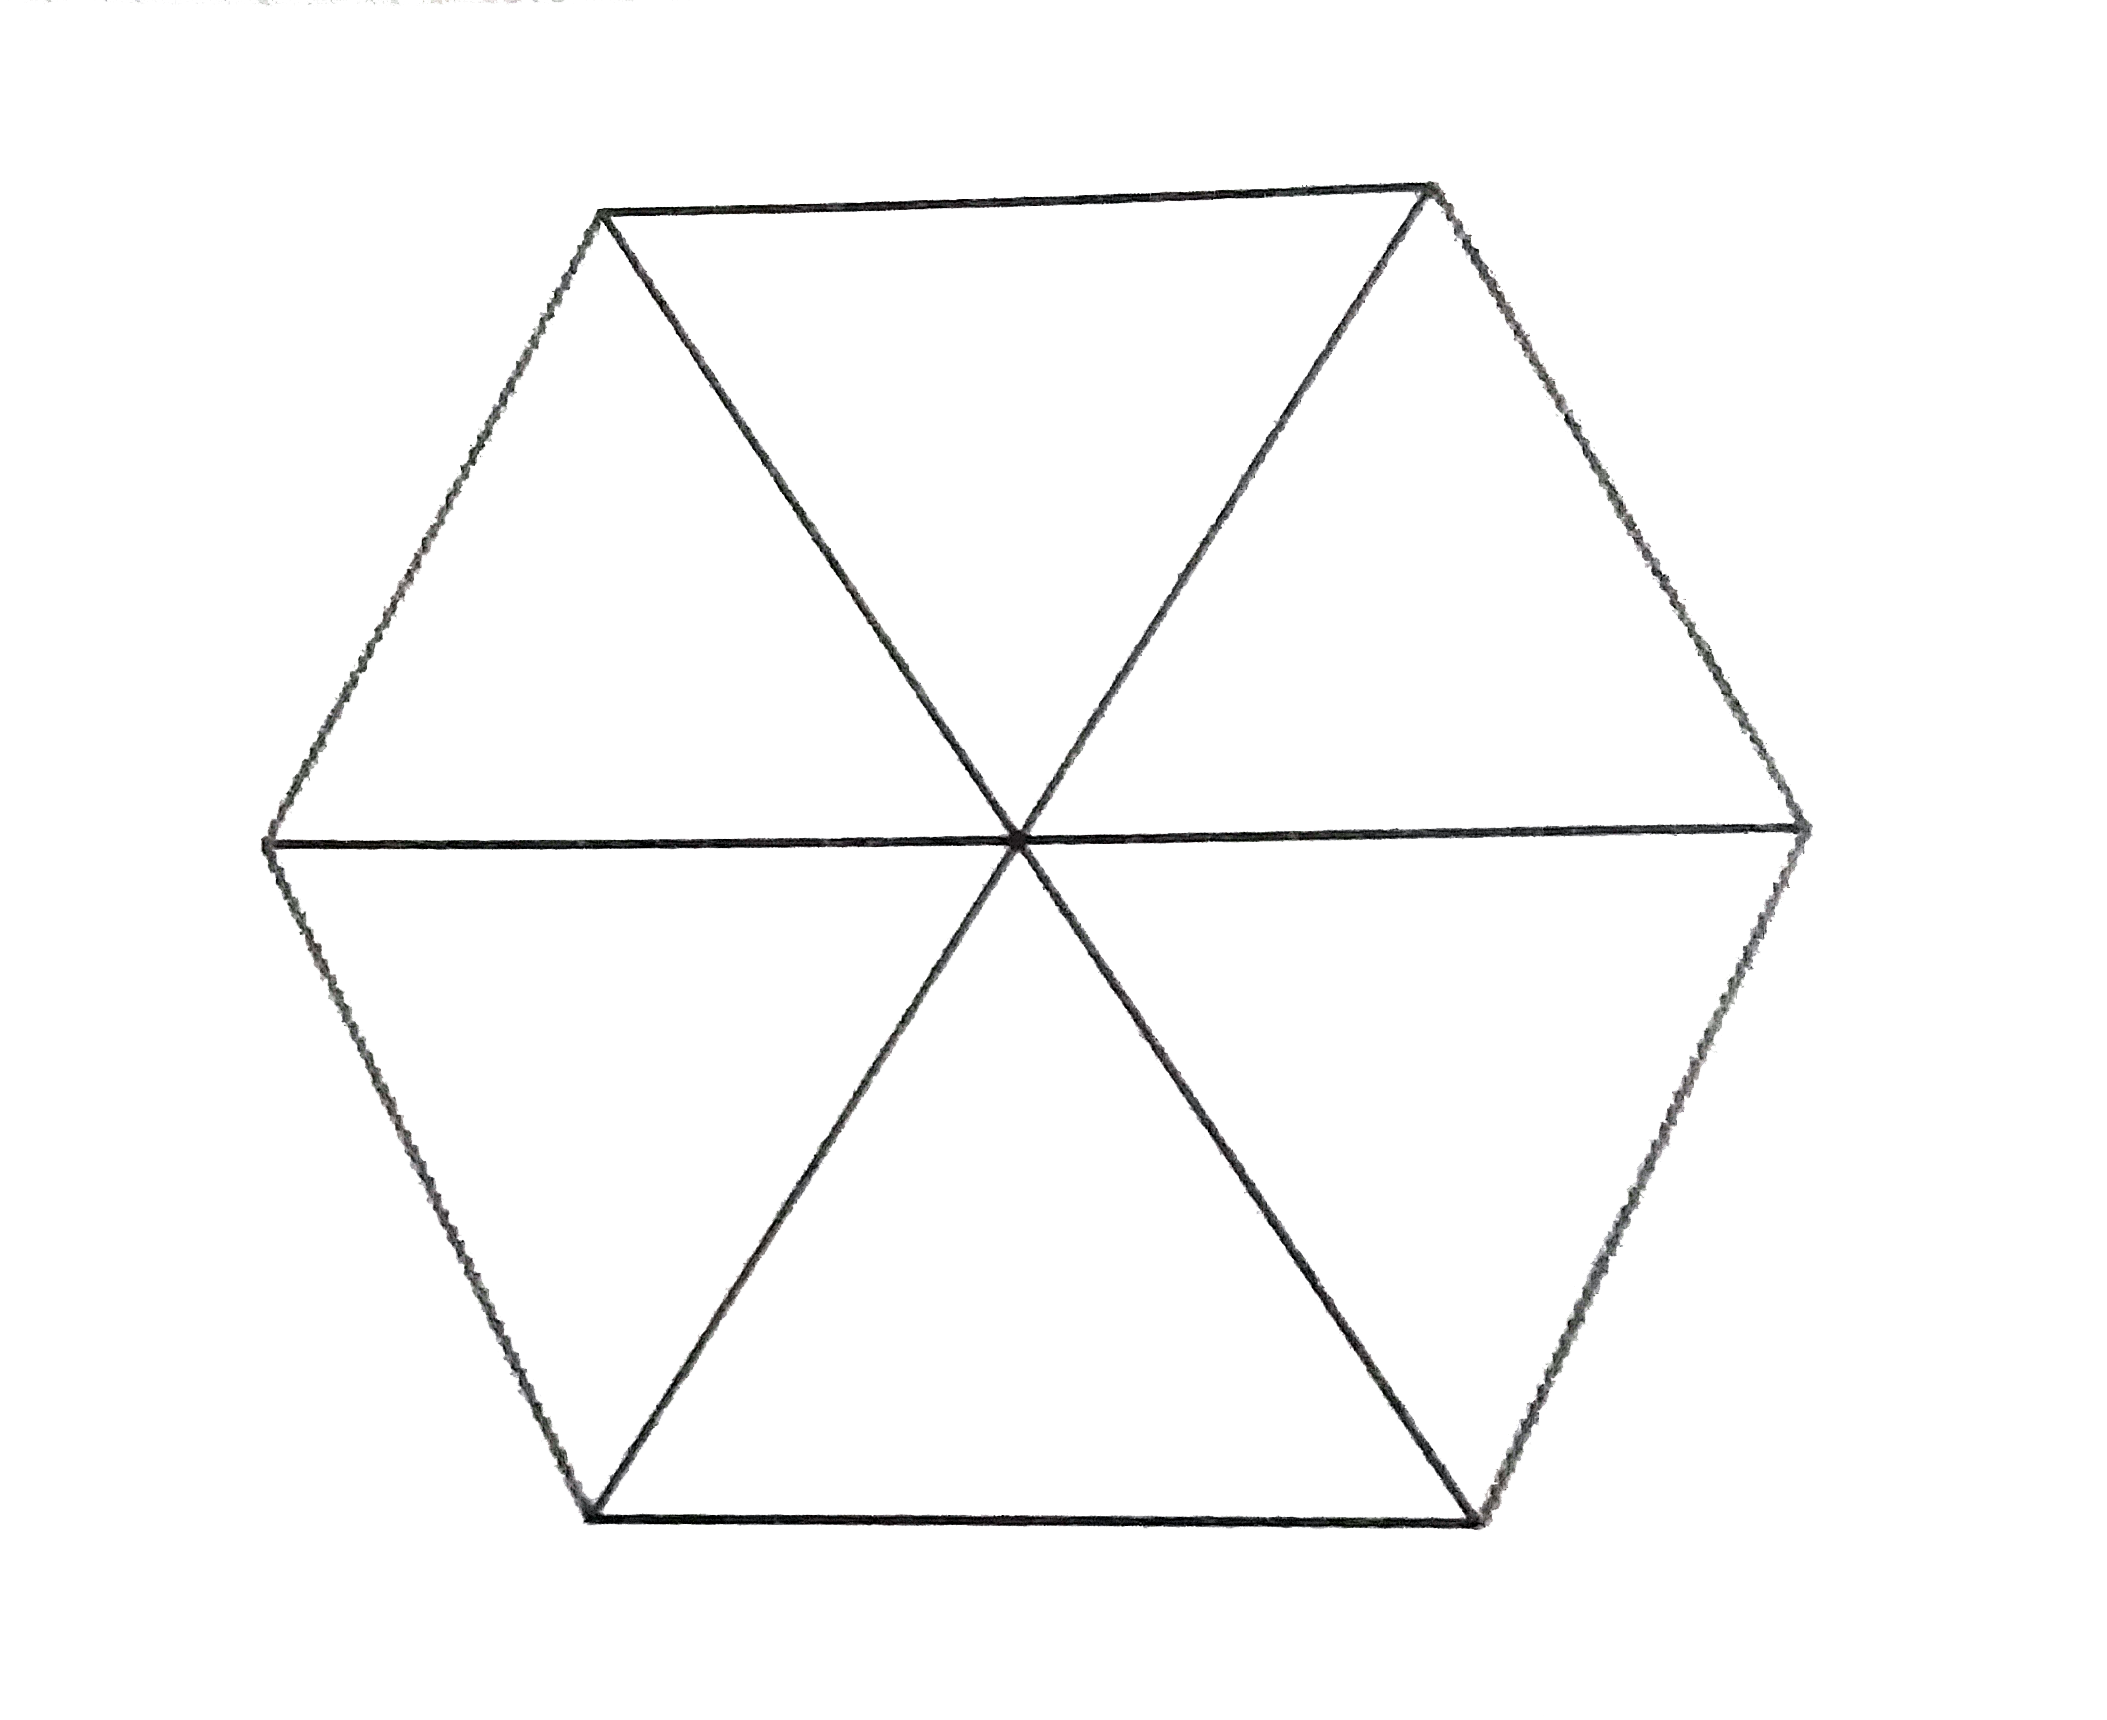 The regular hexagon shown above is divided into six congruent equilateral triangle. What is the measure, in degrees, of one of the interior angles of the hexagon?